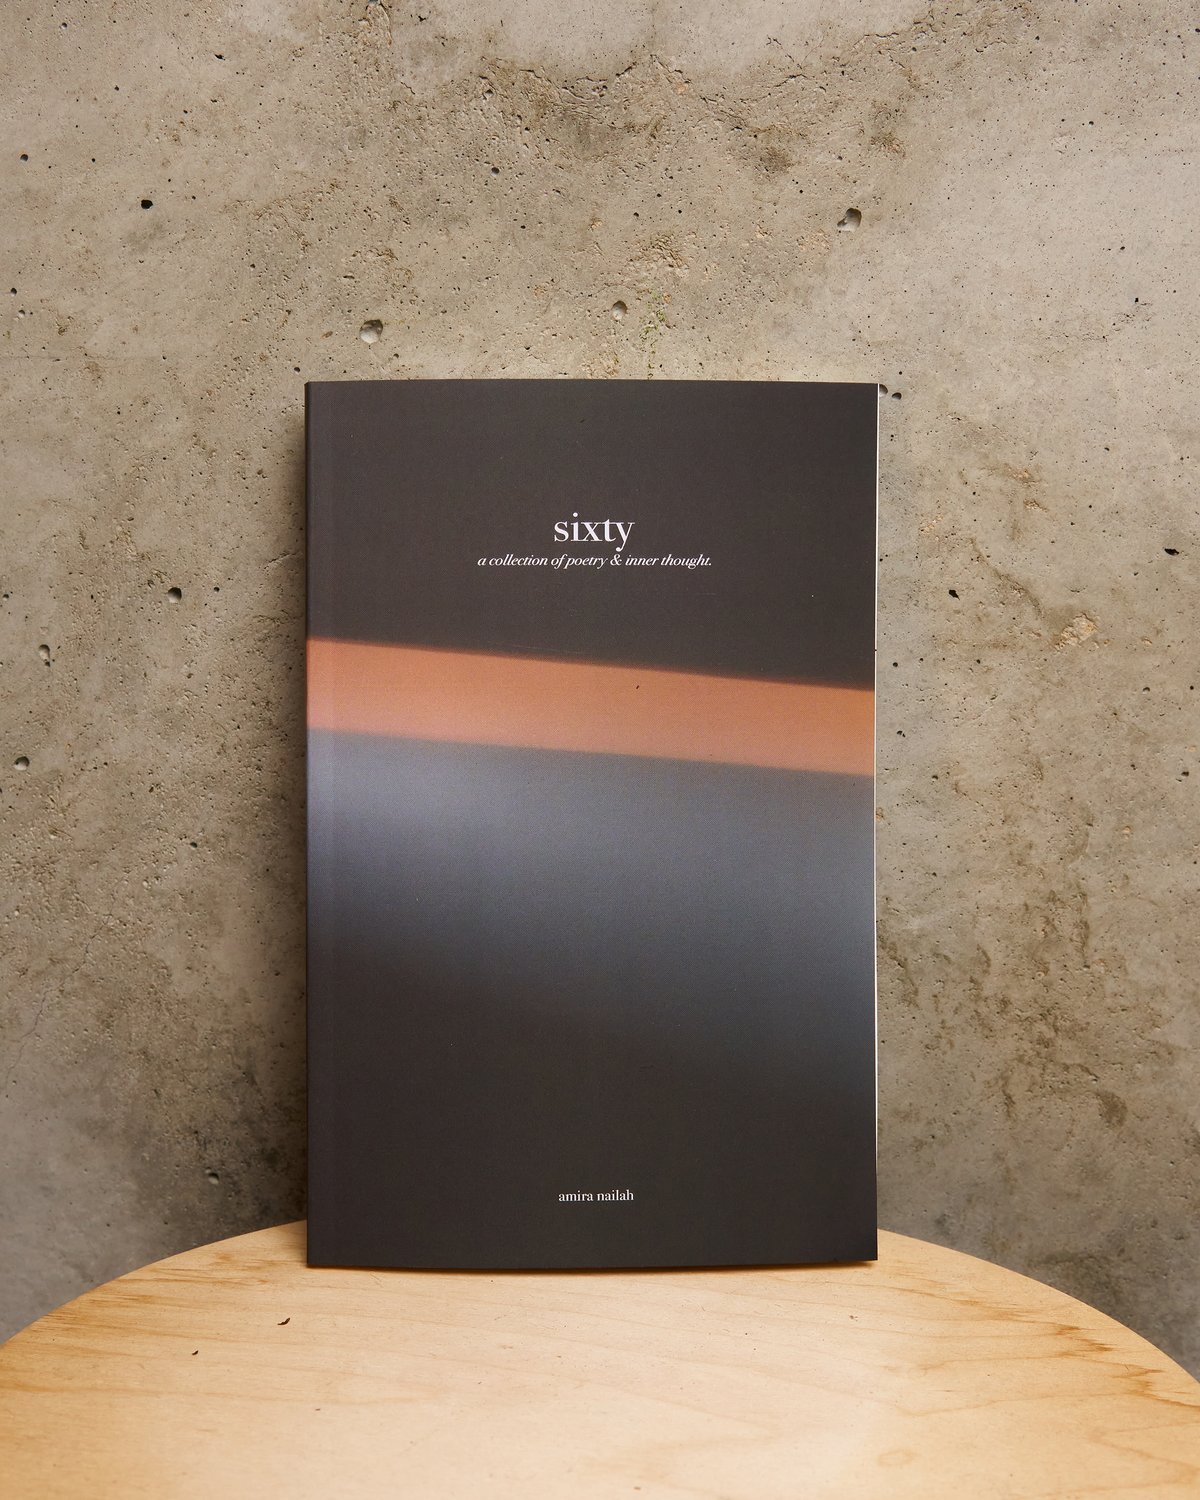 Image of sixty: a collection of poetry & inner thought.